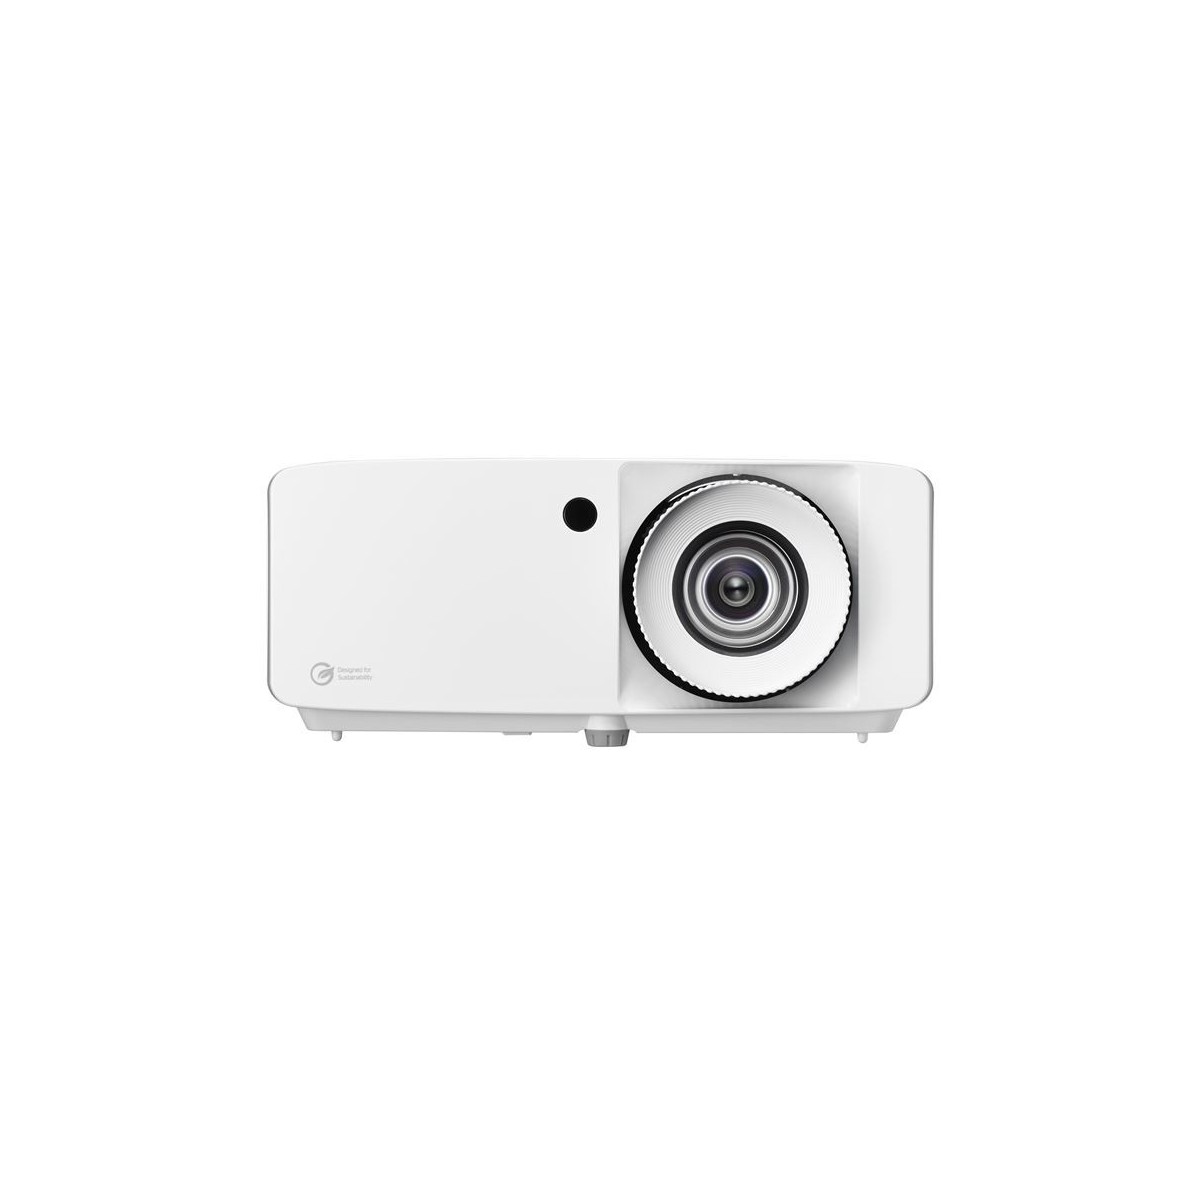 Optoma ZH450 Projector FHD 4500lm - Projector